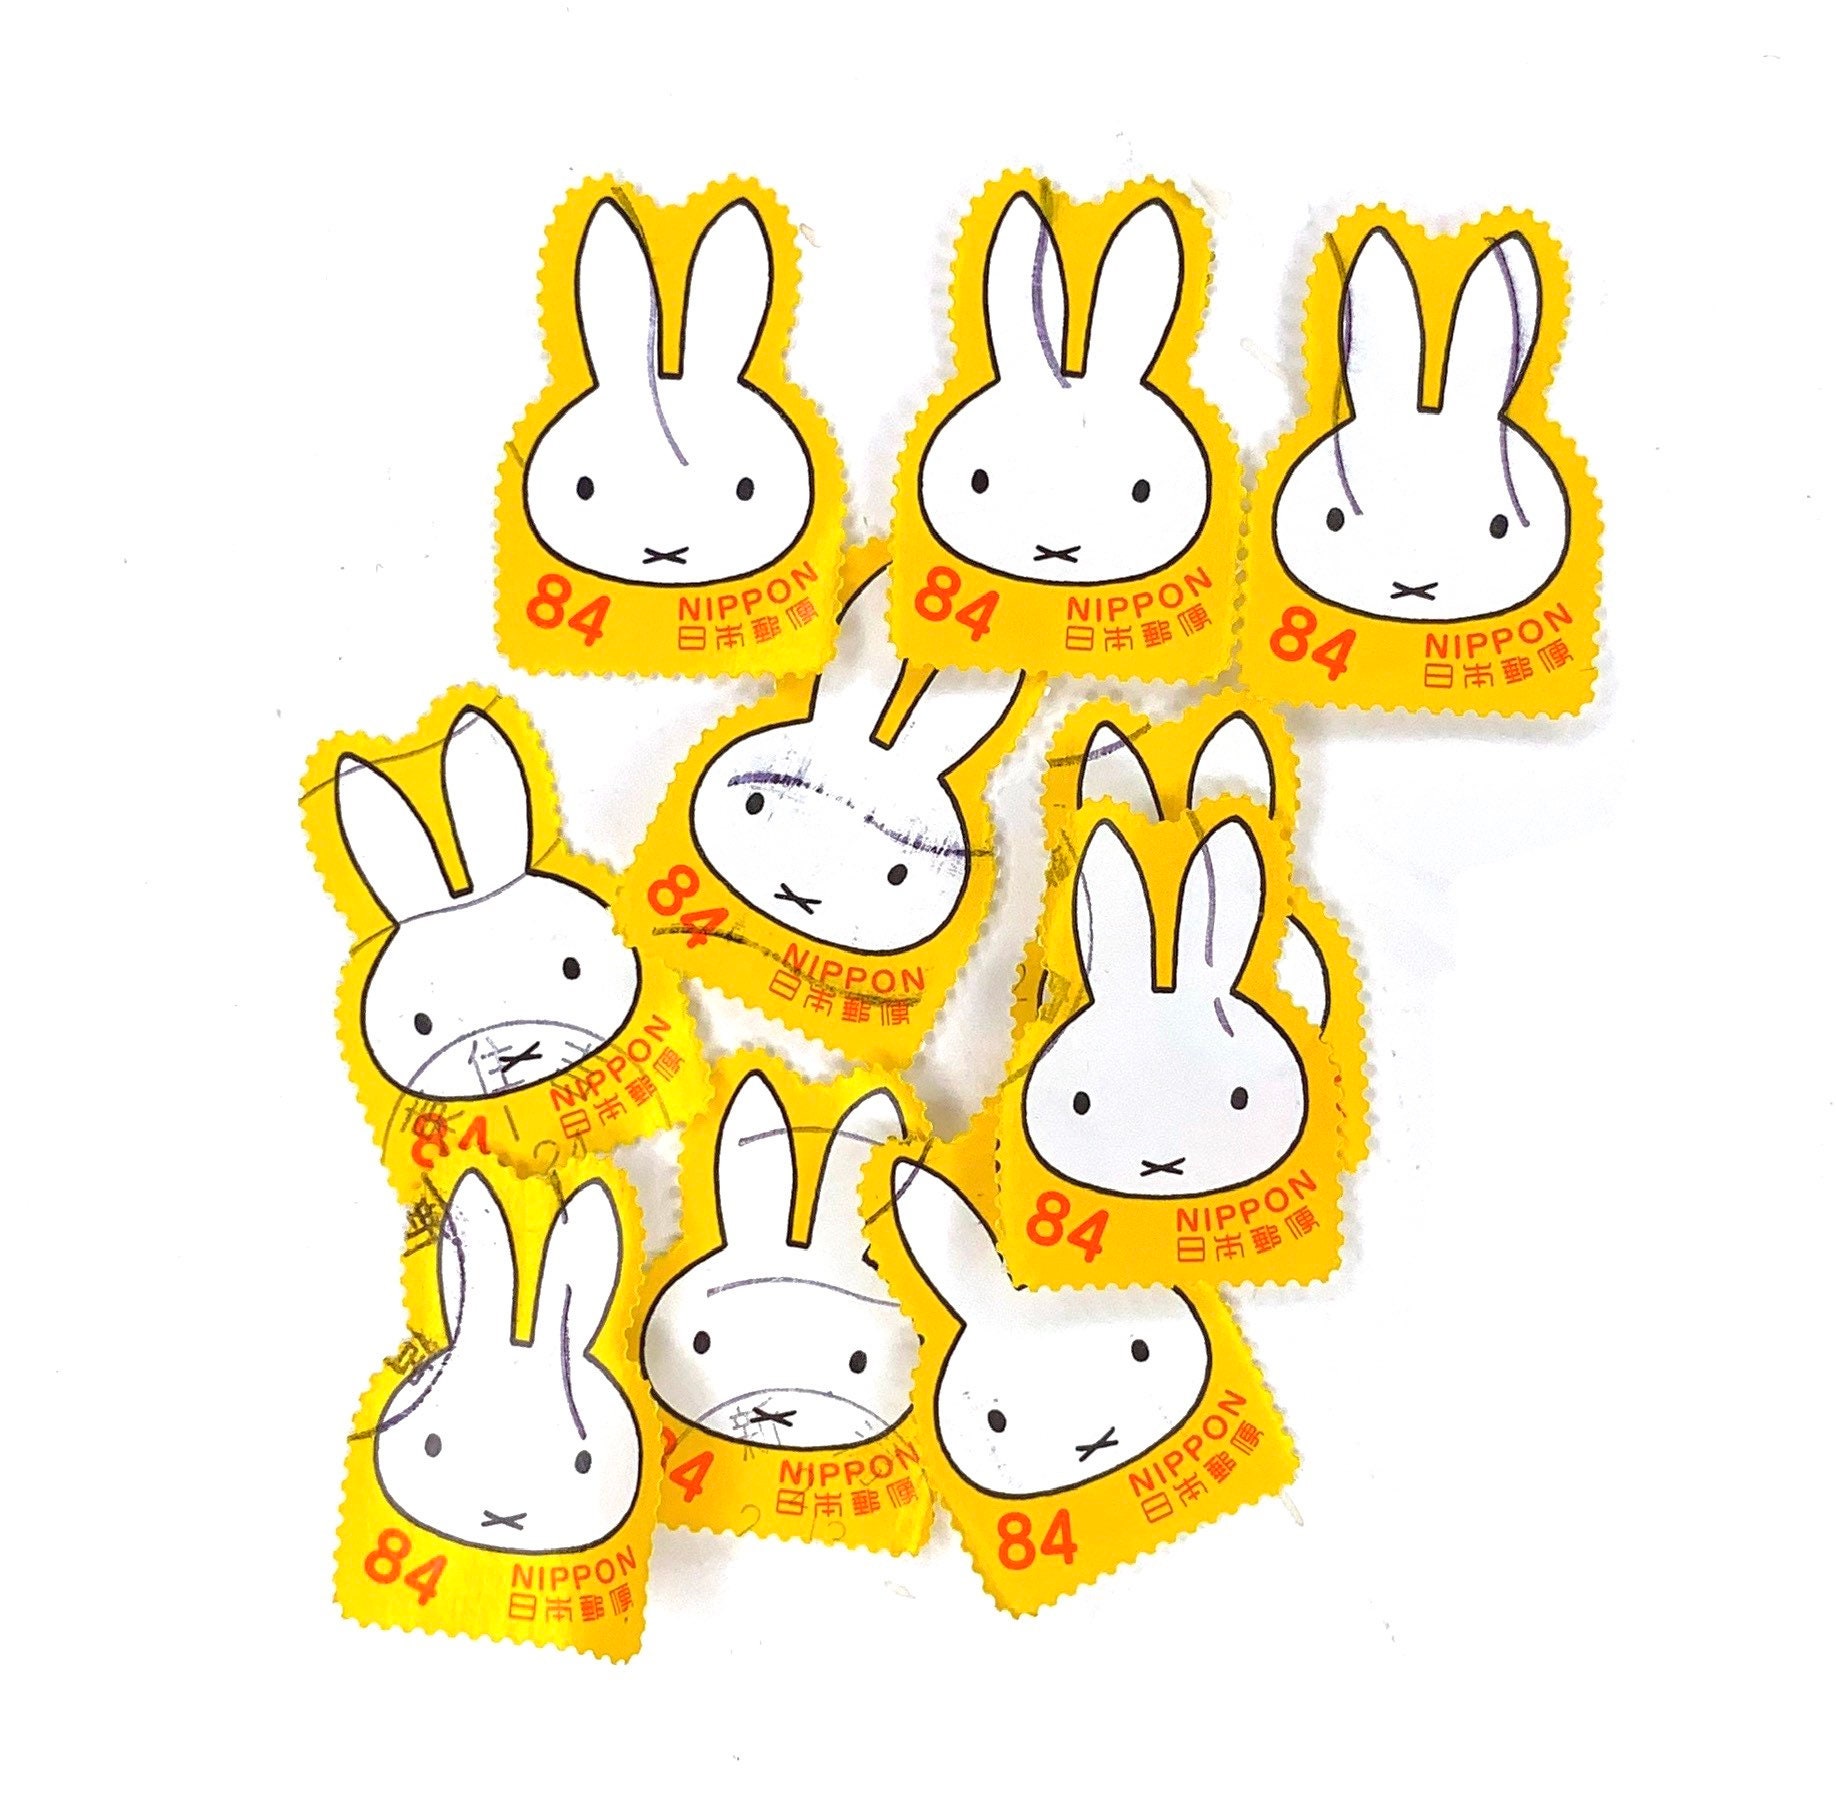 50 Miffy Bunny Envelope Seals / Labels / Stickers, 1 x 1.5